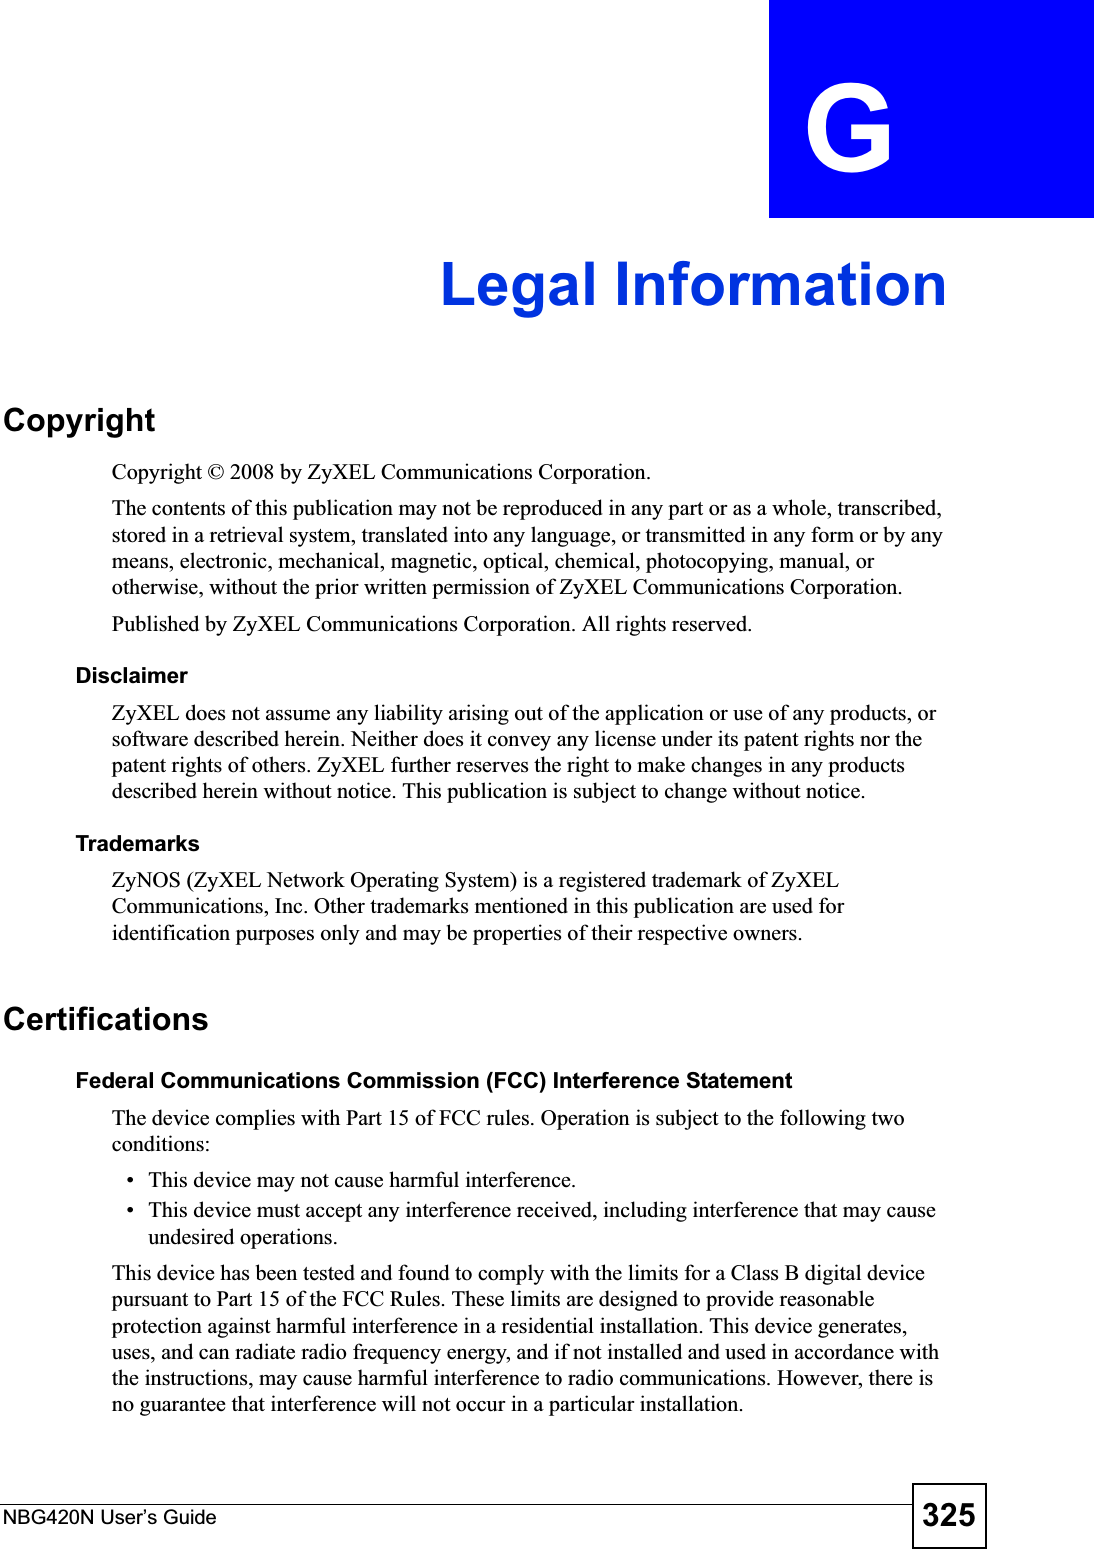 NBG420N User’s Guide 325APPENDIX  G Legal InformationCopyrightCopyright © 2008 by ZyXEL Communications Corporation.The contents of this publication may not be reproduced in any part or as a whole, transcribed, stored in a retrieval system, translated into any language, or transmitted in any form or by any means, electronic, mechanical, magnetic, optical, chemical, photocopying, manual, or otherwise, without the prior written permission of ZyXEL Communications Corporation.Published by ZyXEL Communications Corporation. All rights reserved.DisclaimerZyXEL does not assume any liability arising out of the application or use of any products, or software described herein. Neither does it convey any license under its patent rights nor the patent rights of others. ZyXEL further reserves the right to make changes in any products described herein without notice. This publication is subject to change without notice.TrademarksZyNOS (ZyXEL Network Operating System) is a registered trademark of ZyXEL Communications, Inc. Other trademarks mentioned in this publication are used for identification purposes only and may be properties of their respective owners.CertificationsFederal Communications Commission (FCC) Interference StatementThe device complies with Part 15 of FCC rules. Operation is subject to the following two conditions:• This device may not cause harmful interference.• This device must accept any interference received, including interference that may cause undesired operations.This device has been tested and found to comply with the limits for a Class B digital device pursuant to Part 15 of the FCC Rules. These limits are designed to provide reasonable protection against harmful interference in a residential installation. This device generates, uses, and can radiate radio frequency energy, and if not installed and used in accordance with the instructions, may cause harmful interference to radio communications. However, there is no guarantee that interference will not occur in a particular installation.